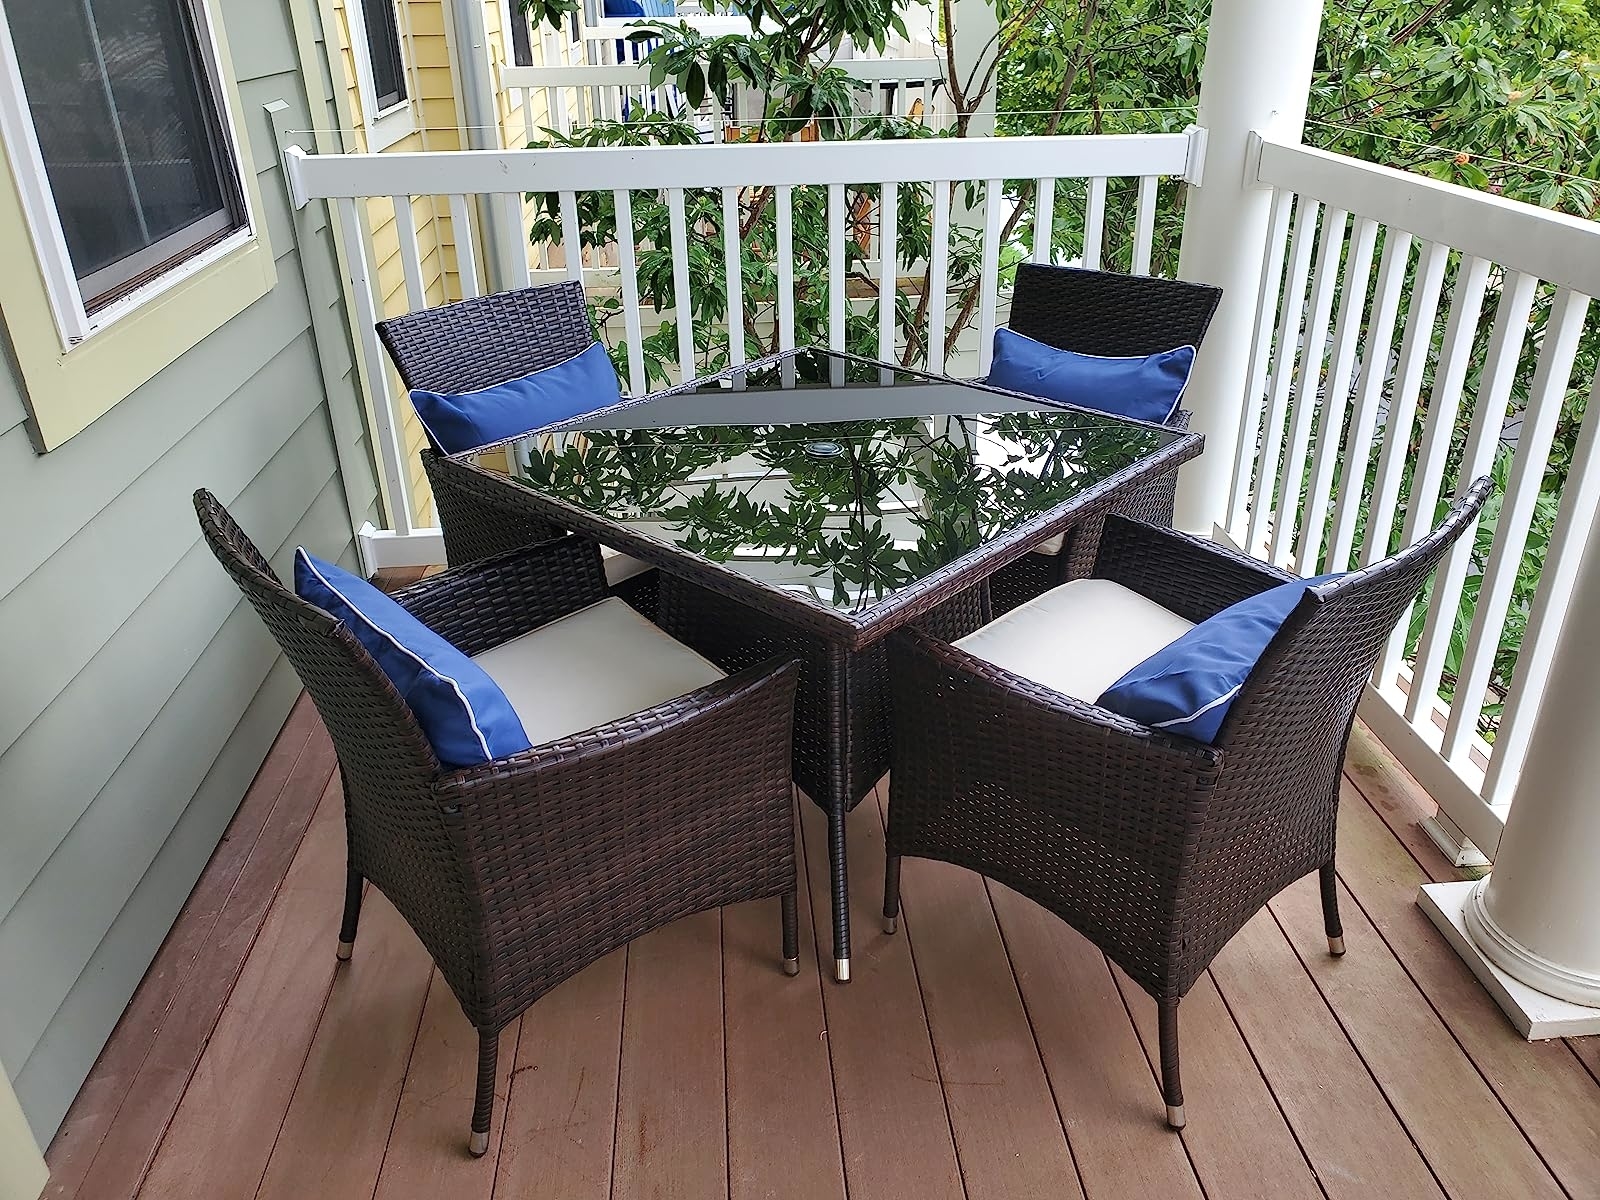 Reviewer image of the dining set on their balcony